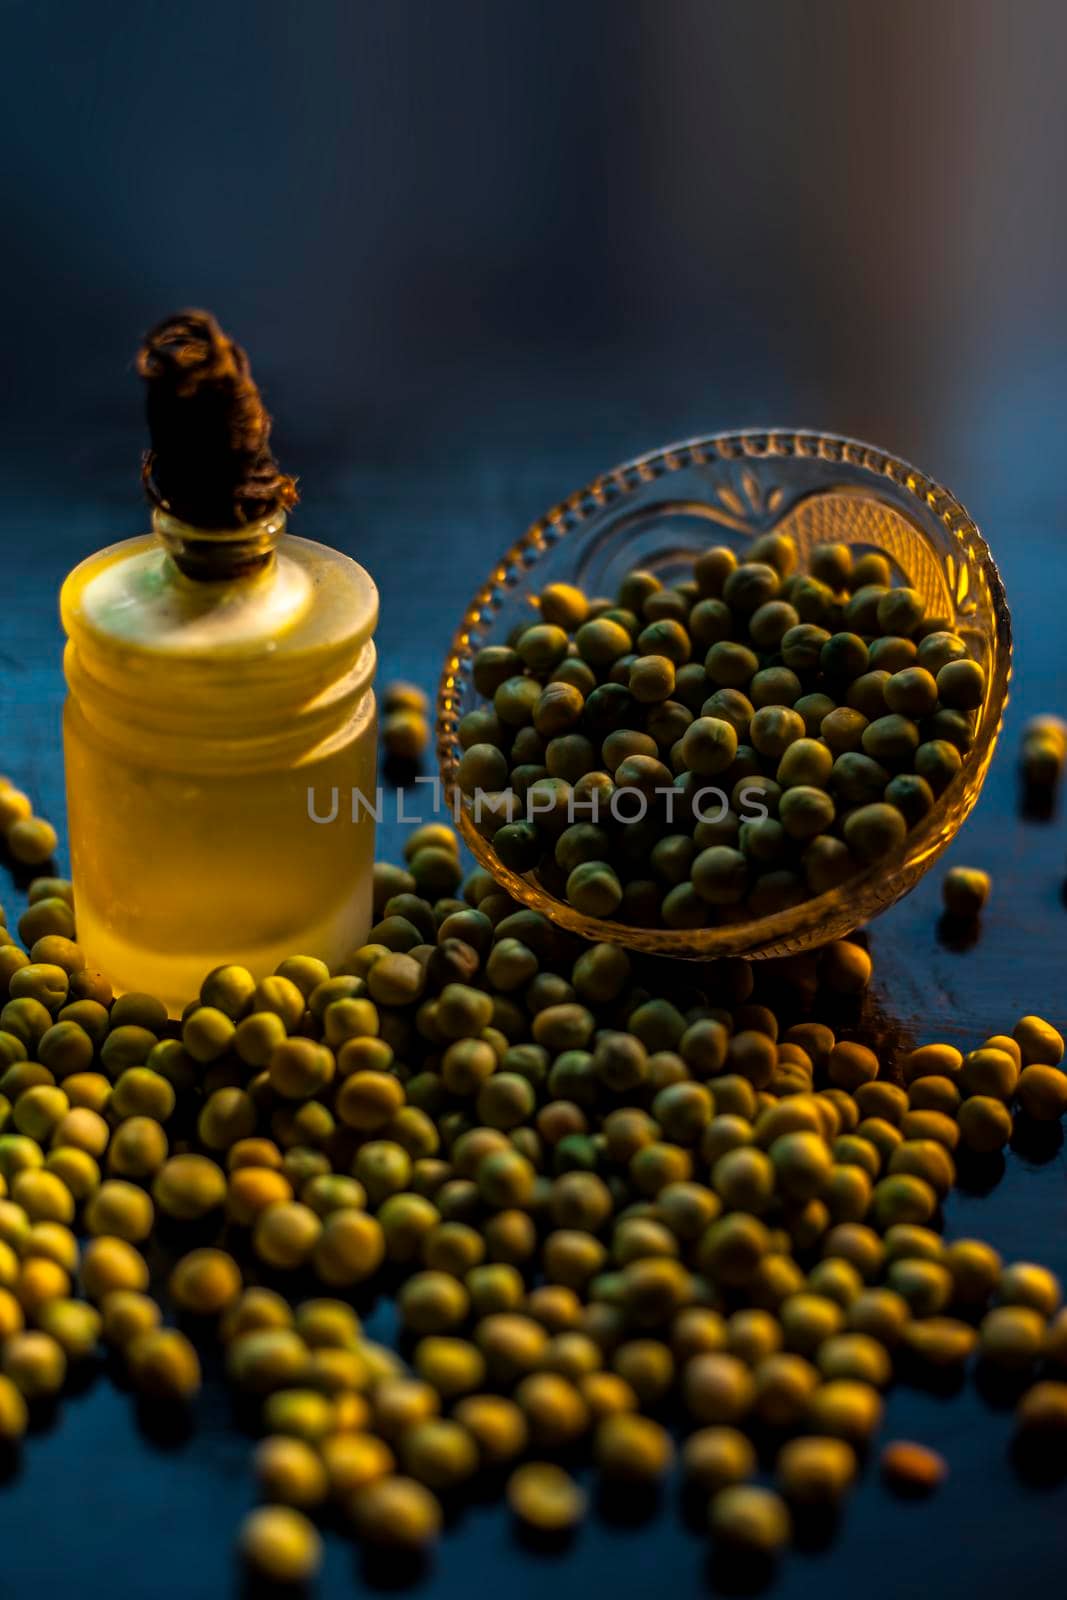 Shot of a bowl of green peas along with its extracted oil in a glass bottle on a black surface. by mirzamlk